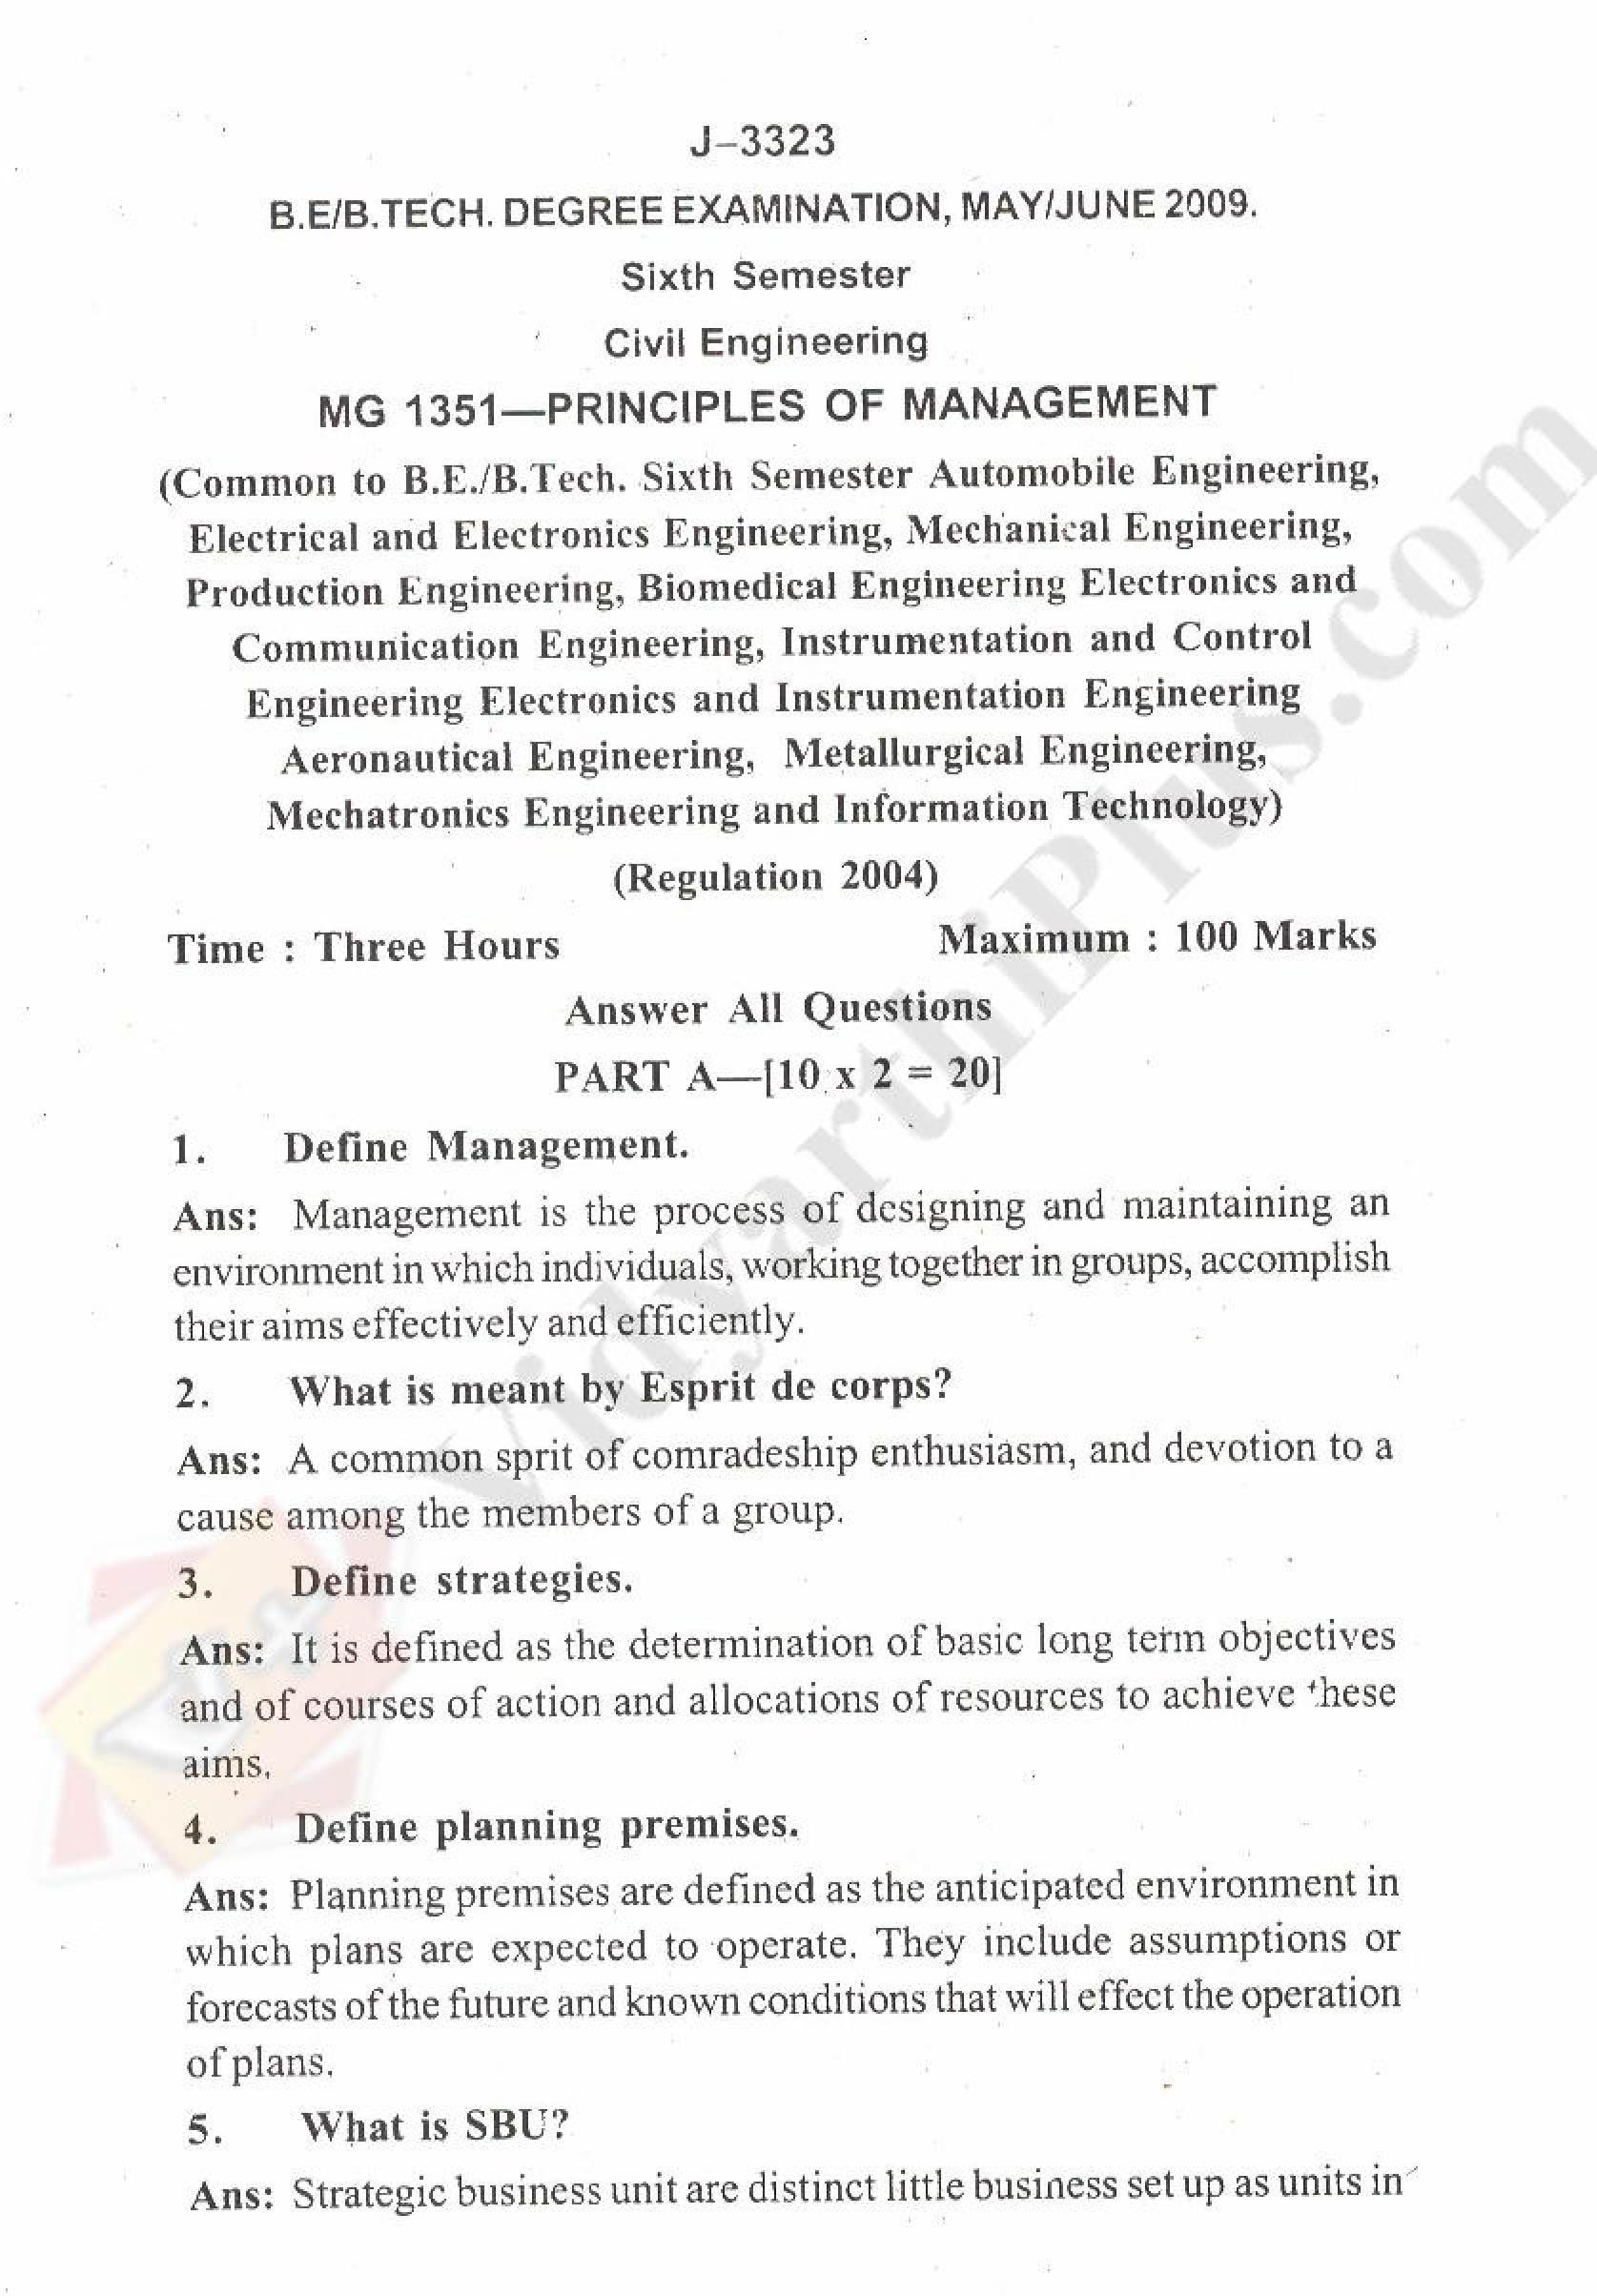 principles of management essay questions and answers pdf